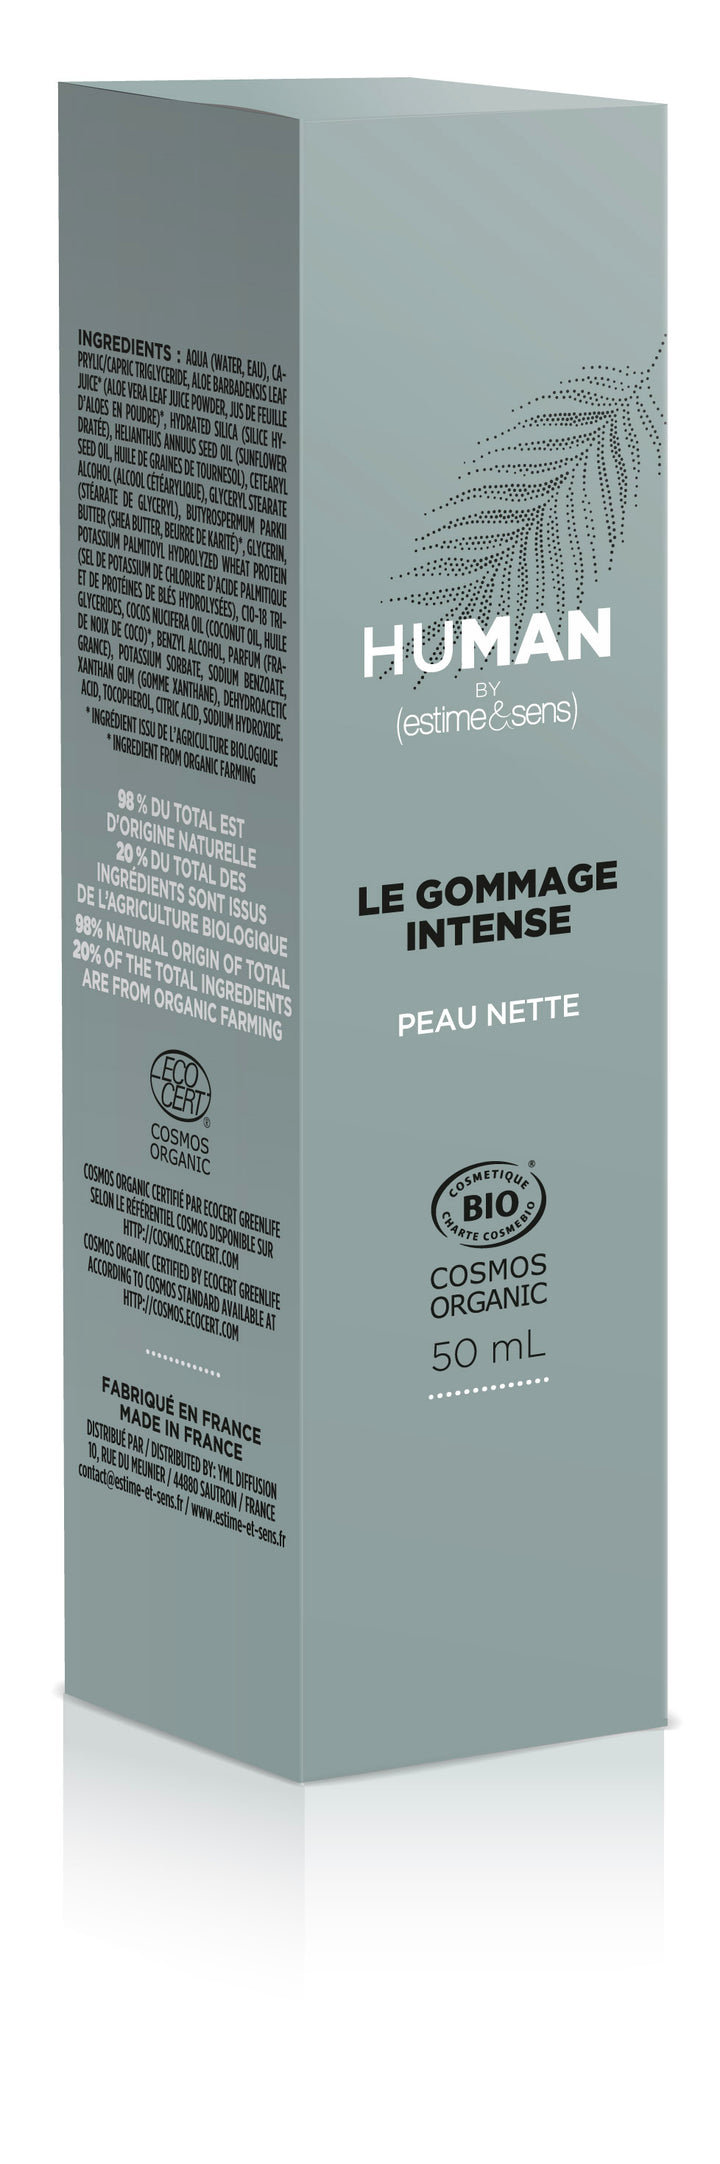 Le gommage intense